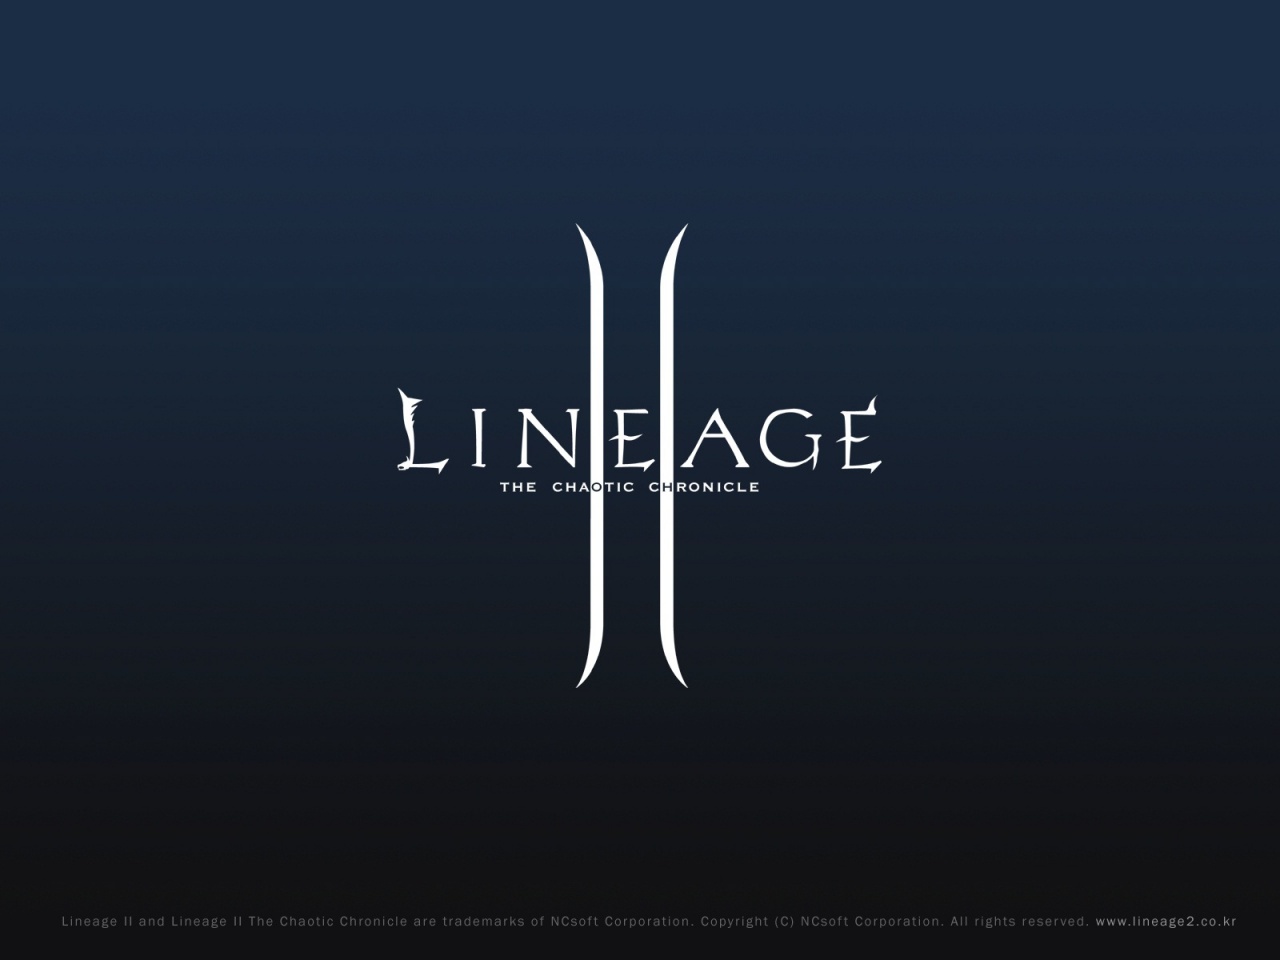 Just Lineage